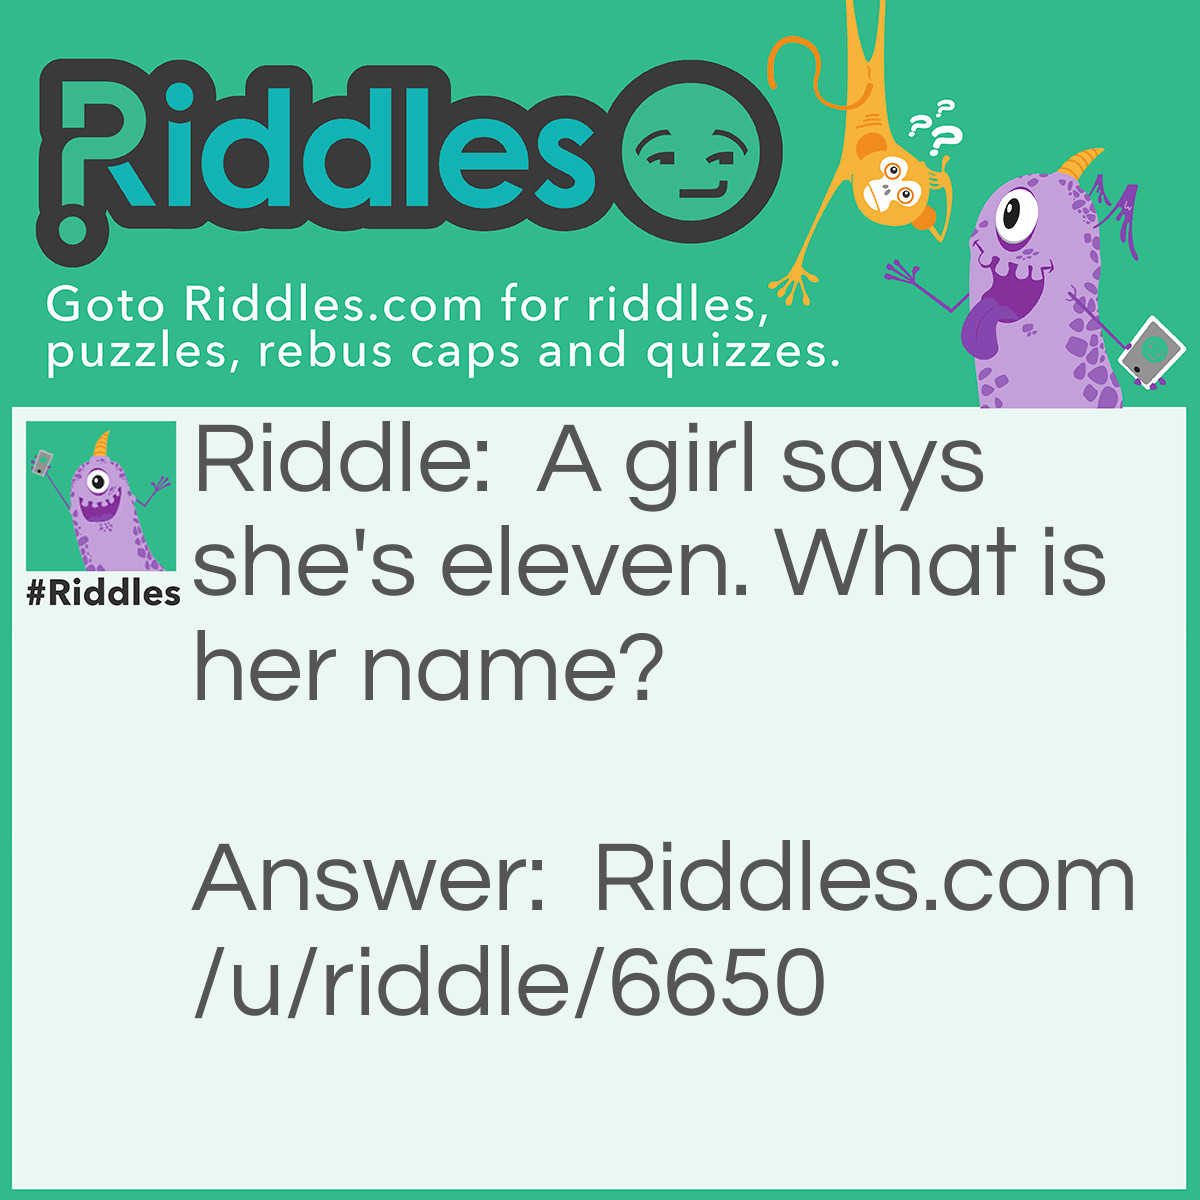 Riddle: A girl says she's eleven. What is her name? Answer: Her name is Eleven.